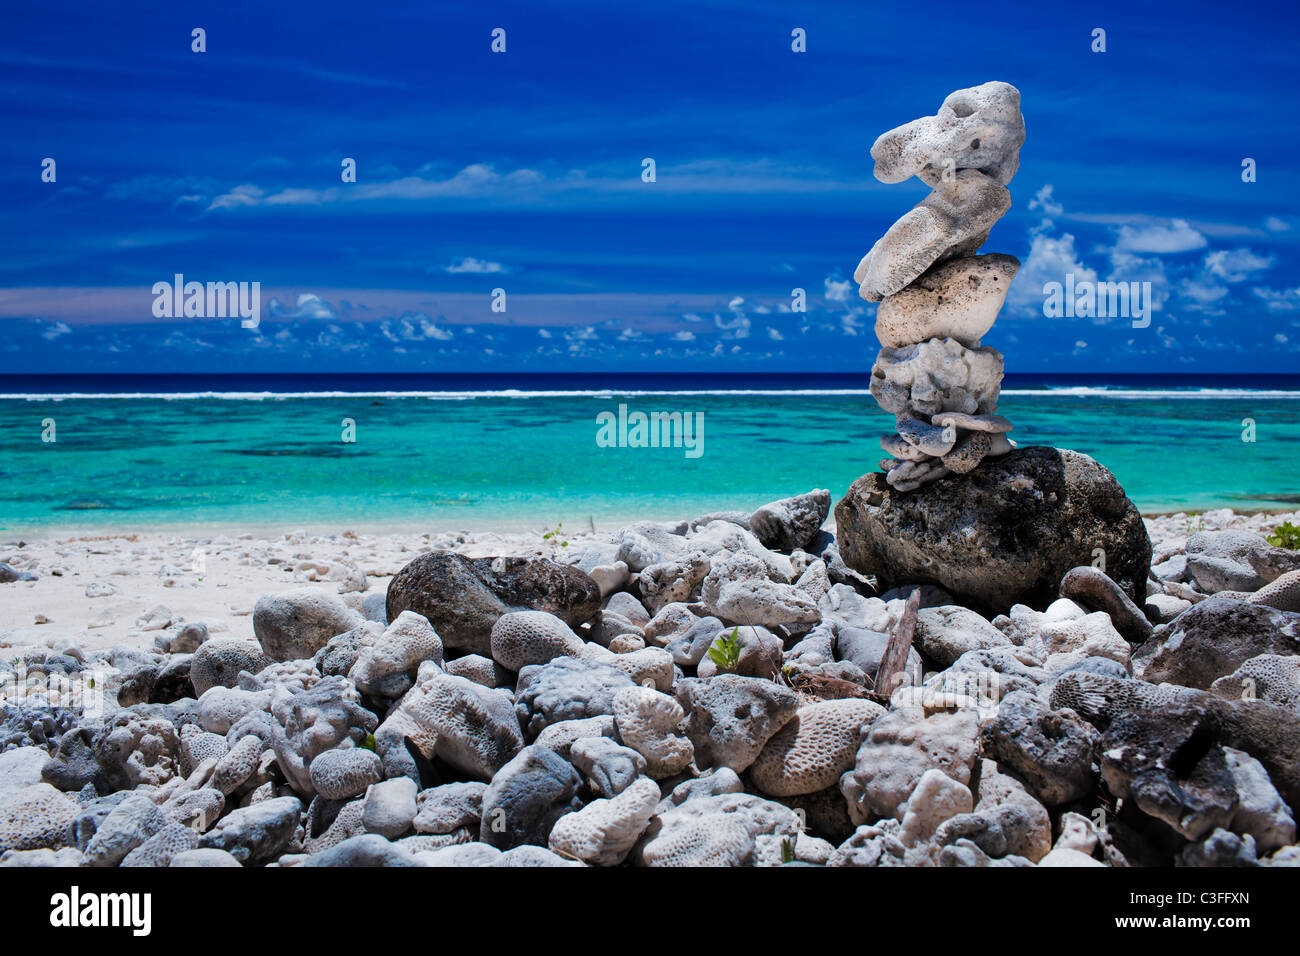 Stack of reef stones on a sky and tropical lagoon Stock Photo